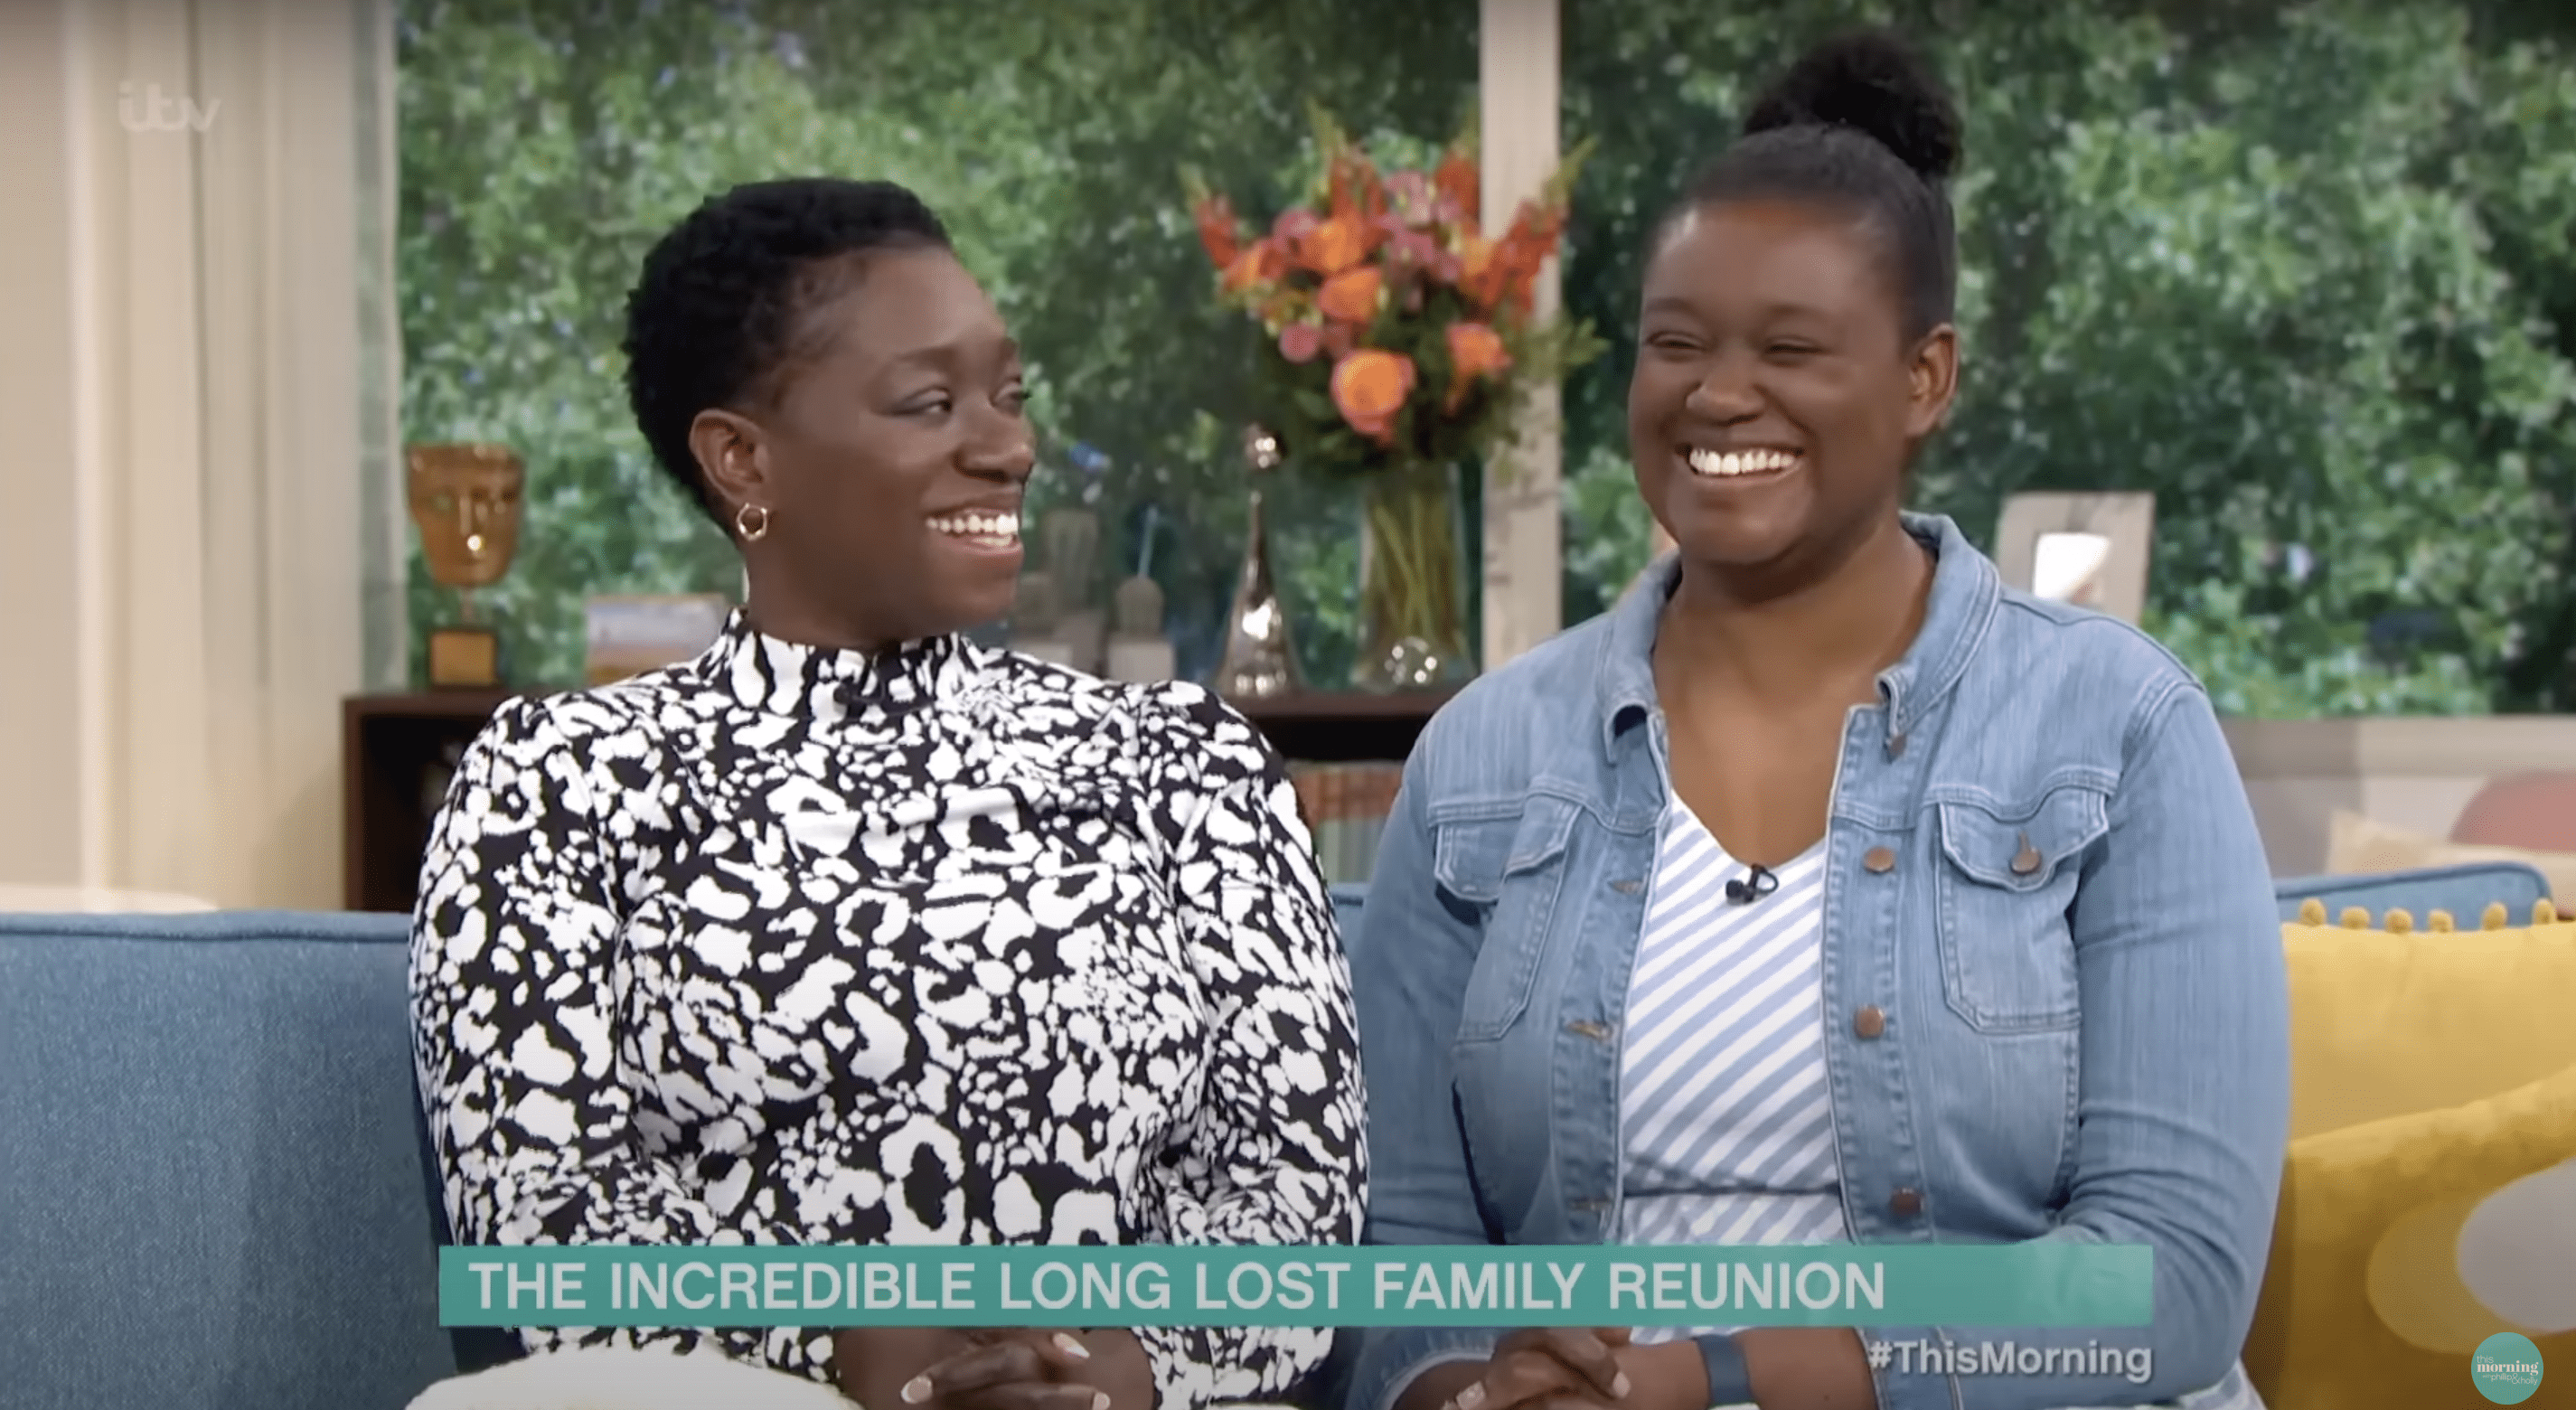 Natasha and Lee-Ann flash heartwarming smiles during their appearance on the morning show. | Source: YouTube.com/This Morning